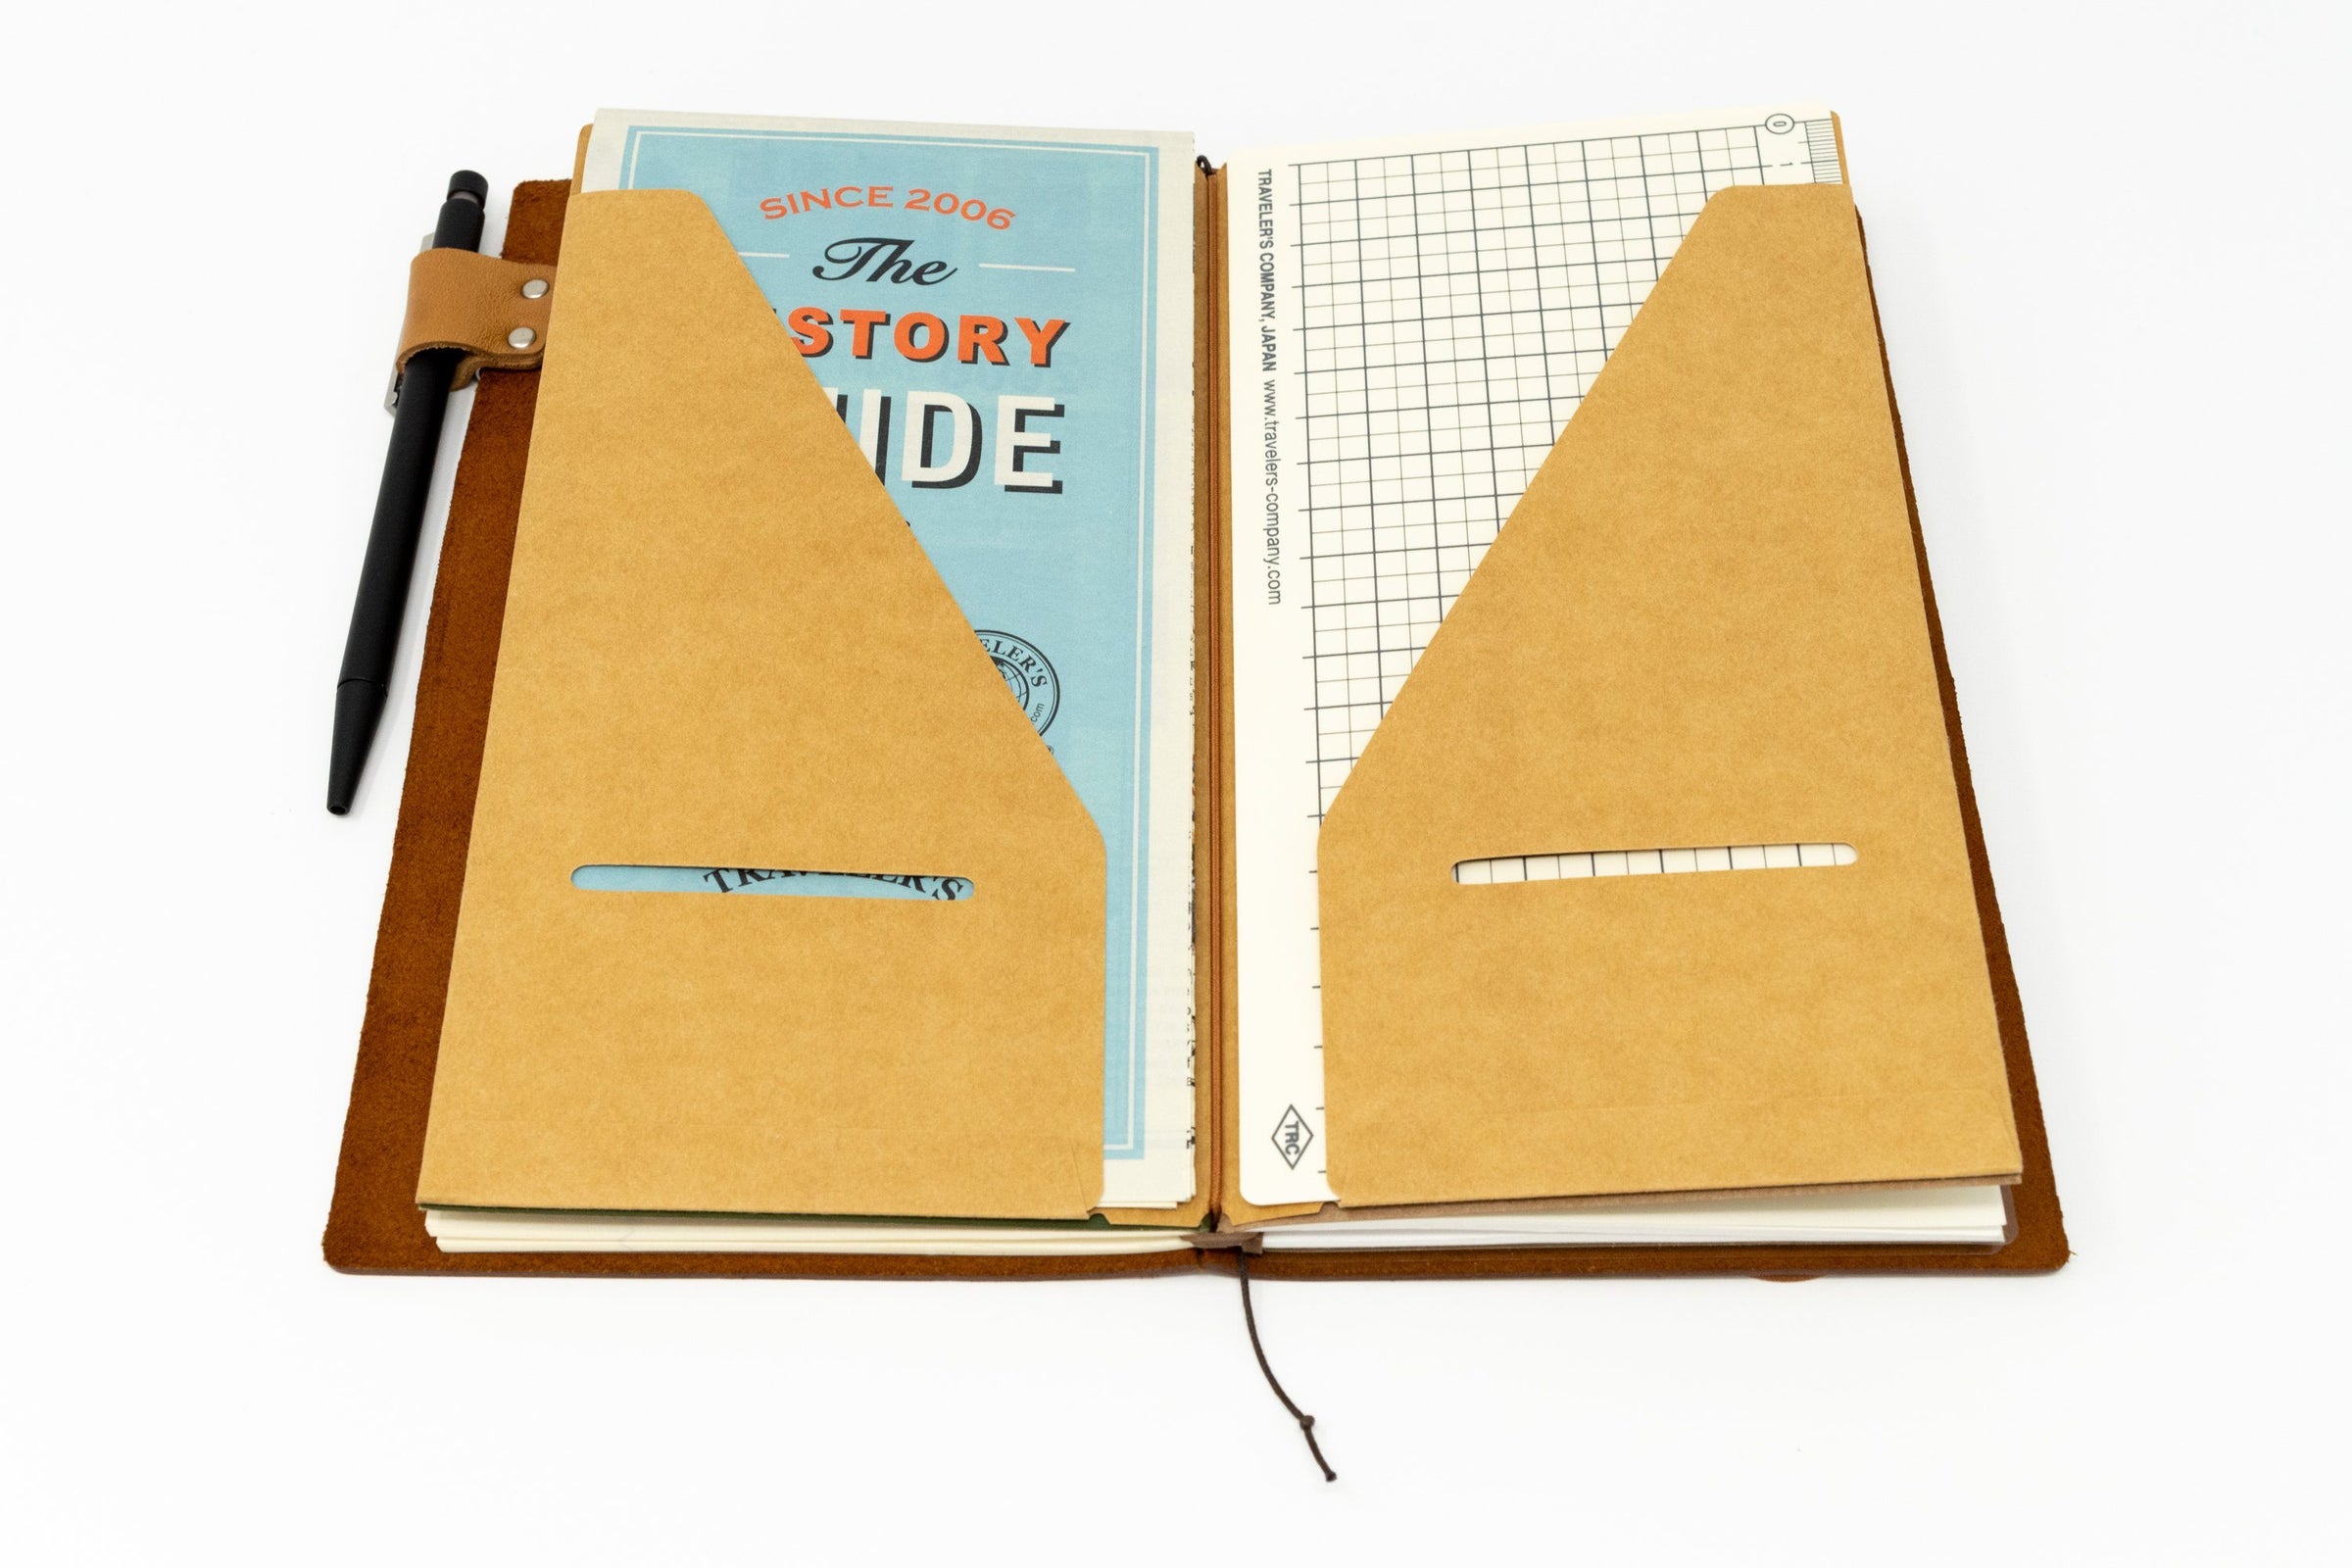 TRAVELER'S notebook Refill-Regular Size- Diary — Two Hands Paperie